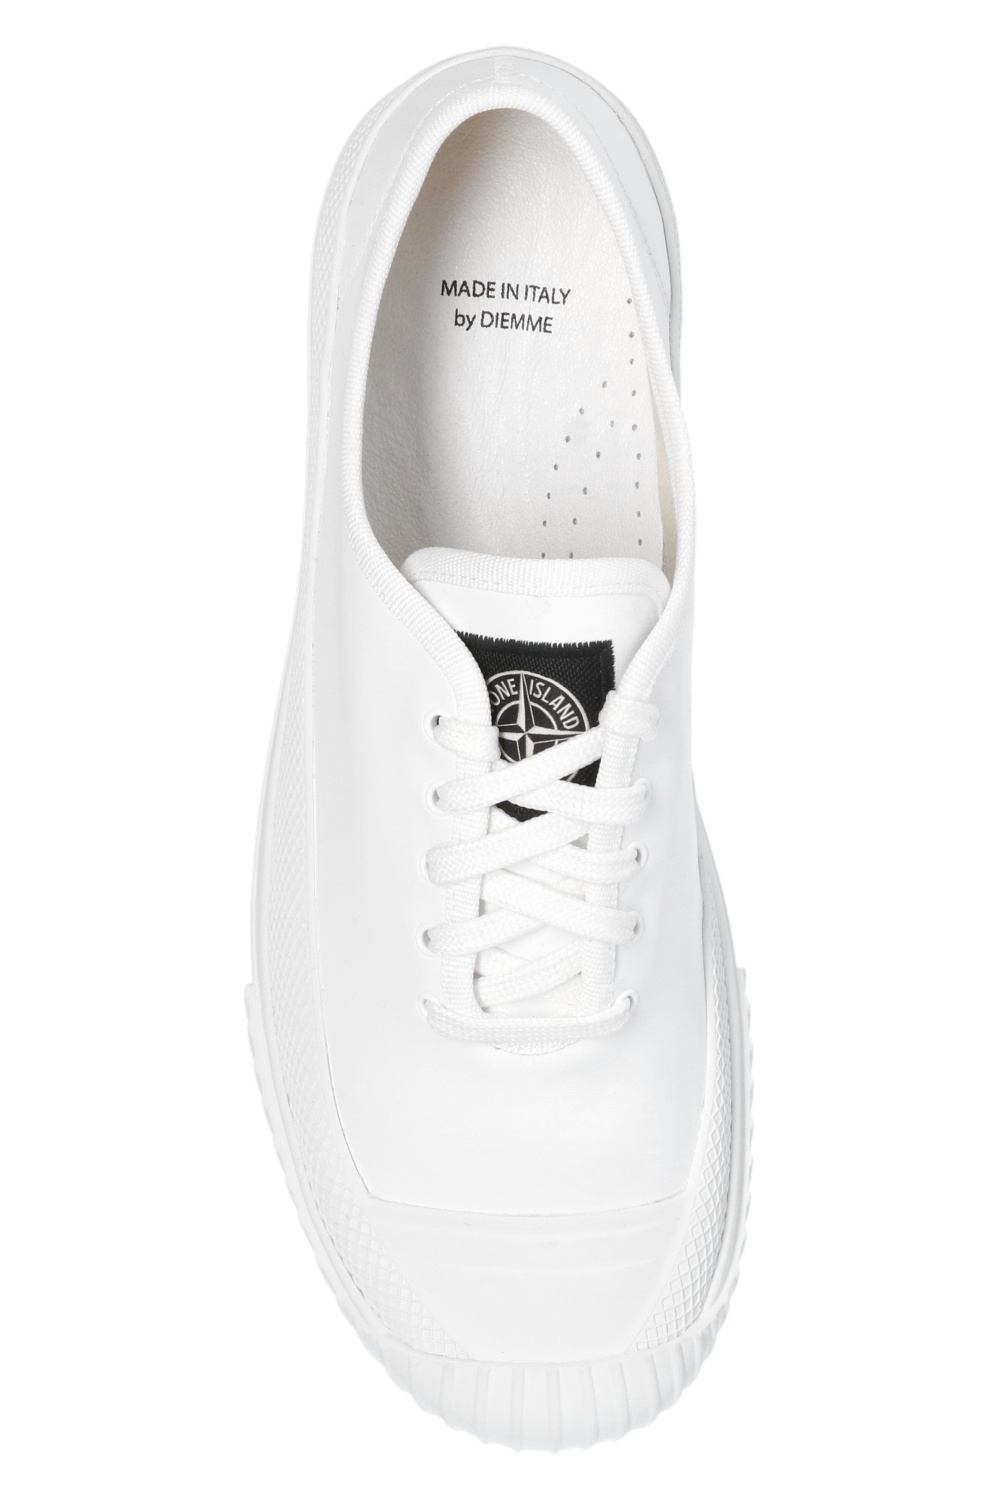 Stone Island Logo-patched sneakers